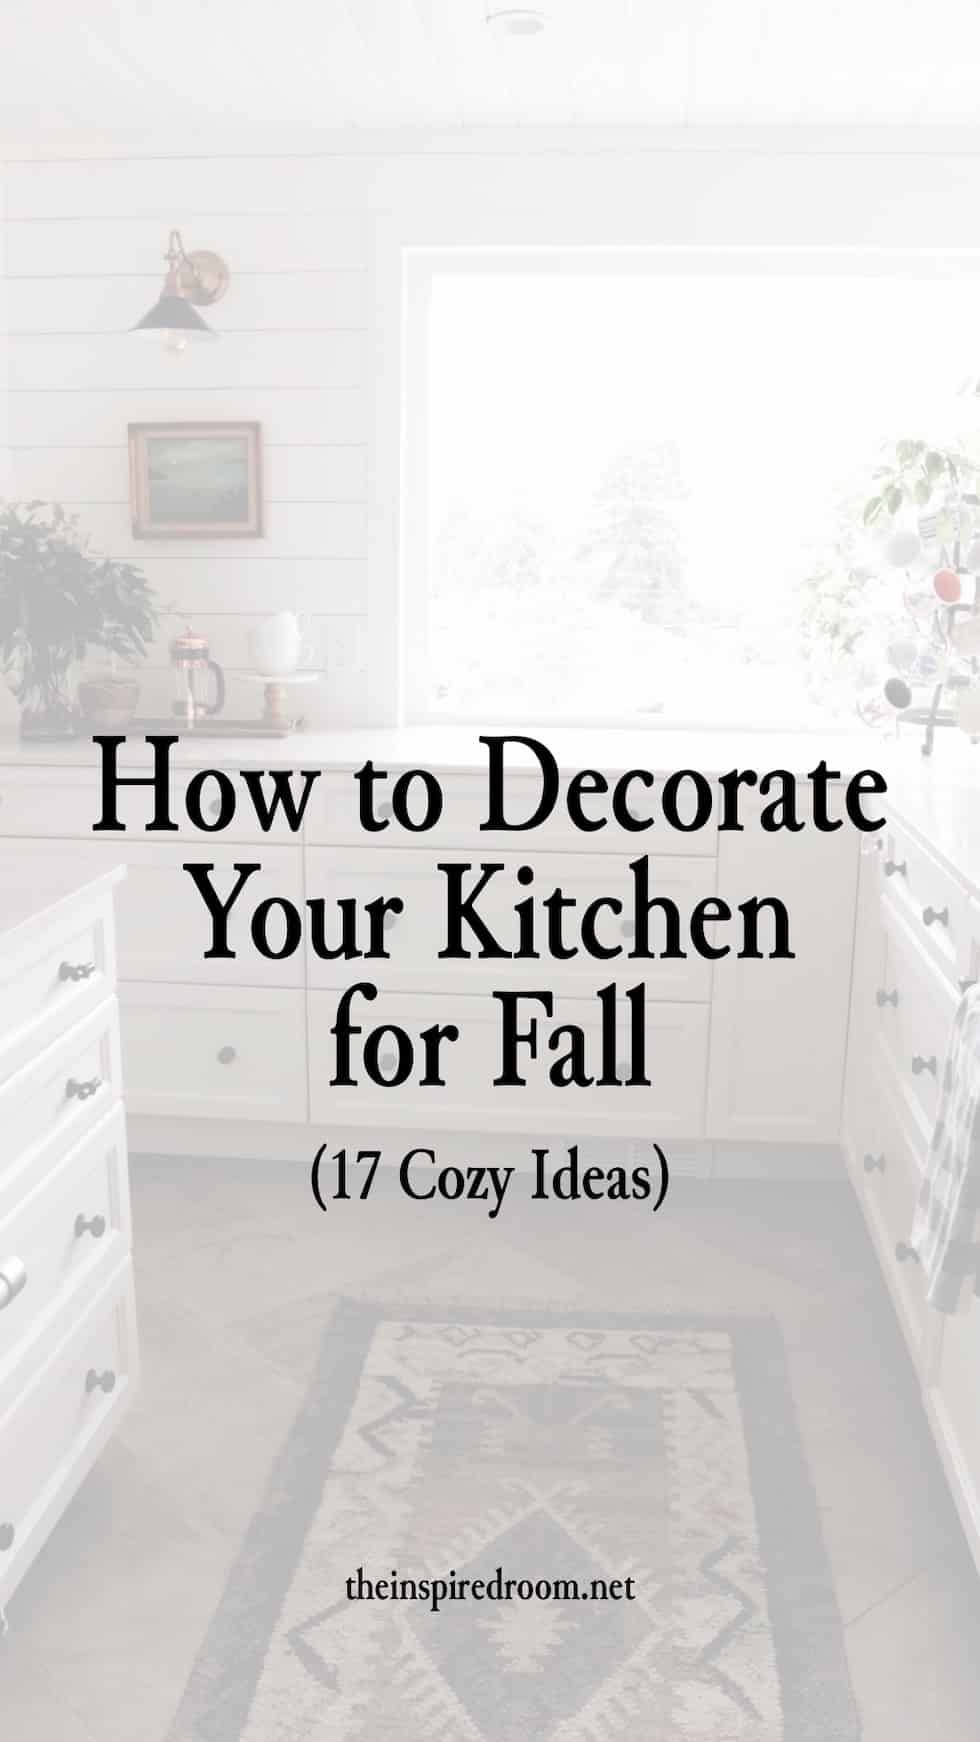 How to Decorate Your Kitchen for Fall (17 Cozy Ideas!)